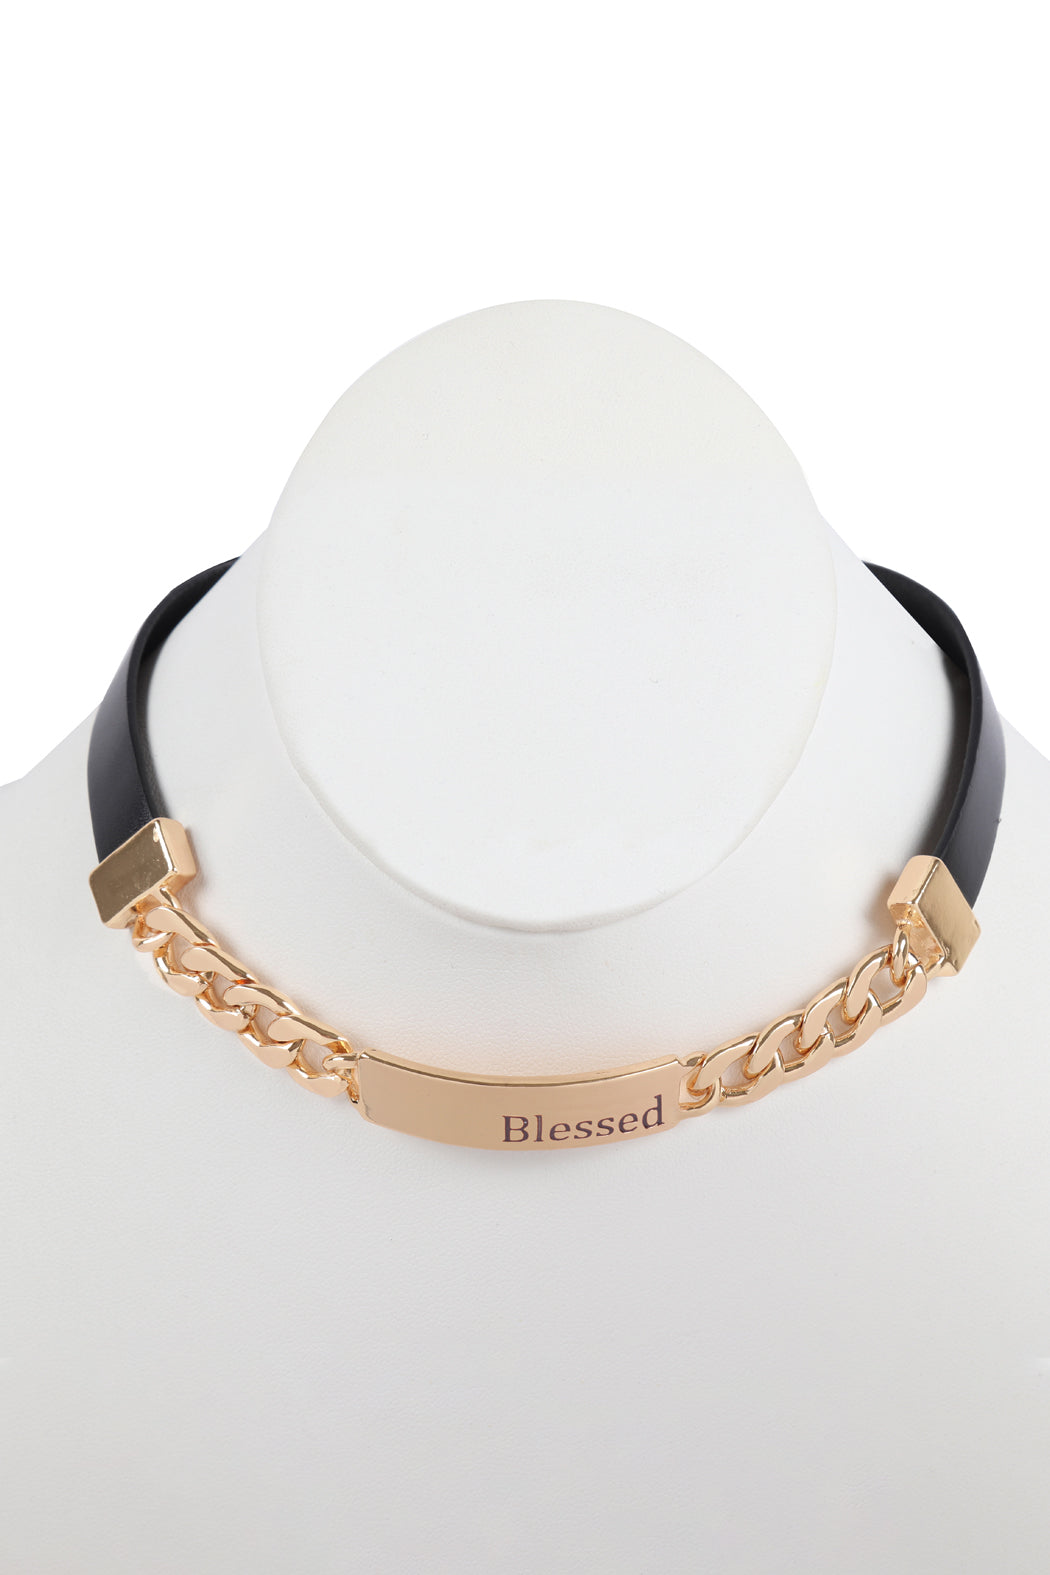 BLESSED CHARM LONG CHAIN-LEATHER BRACELET